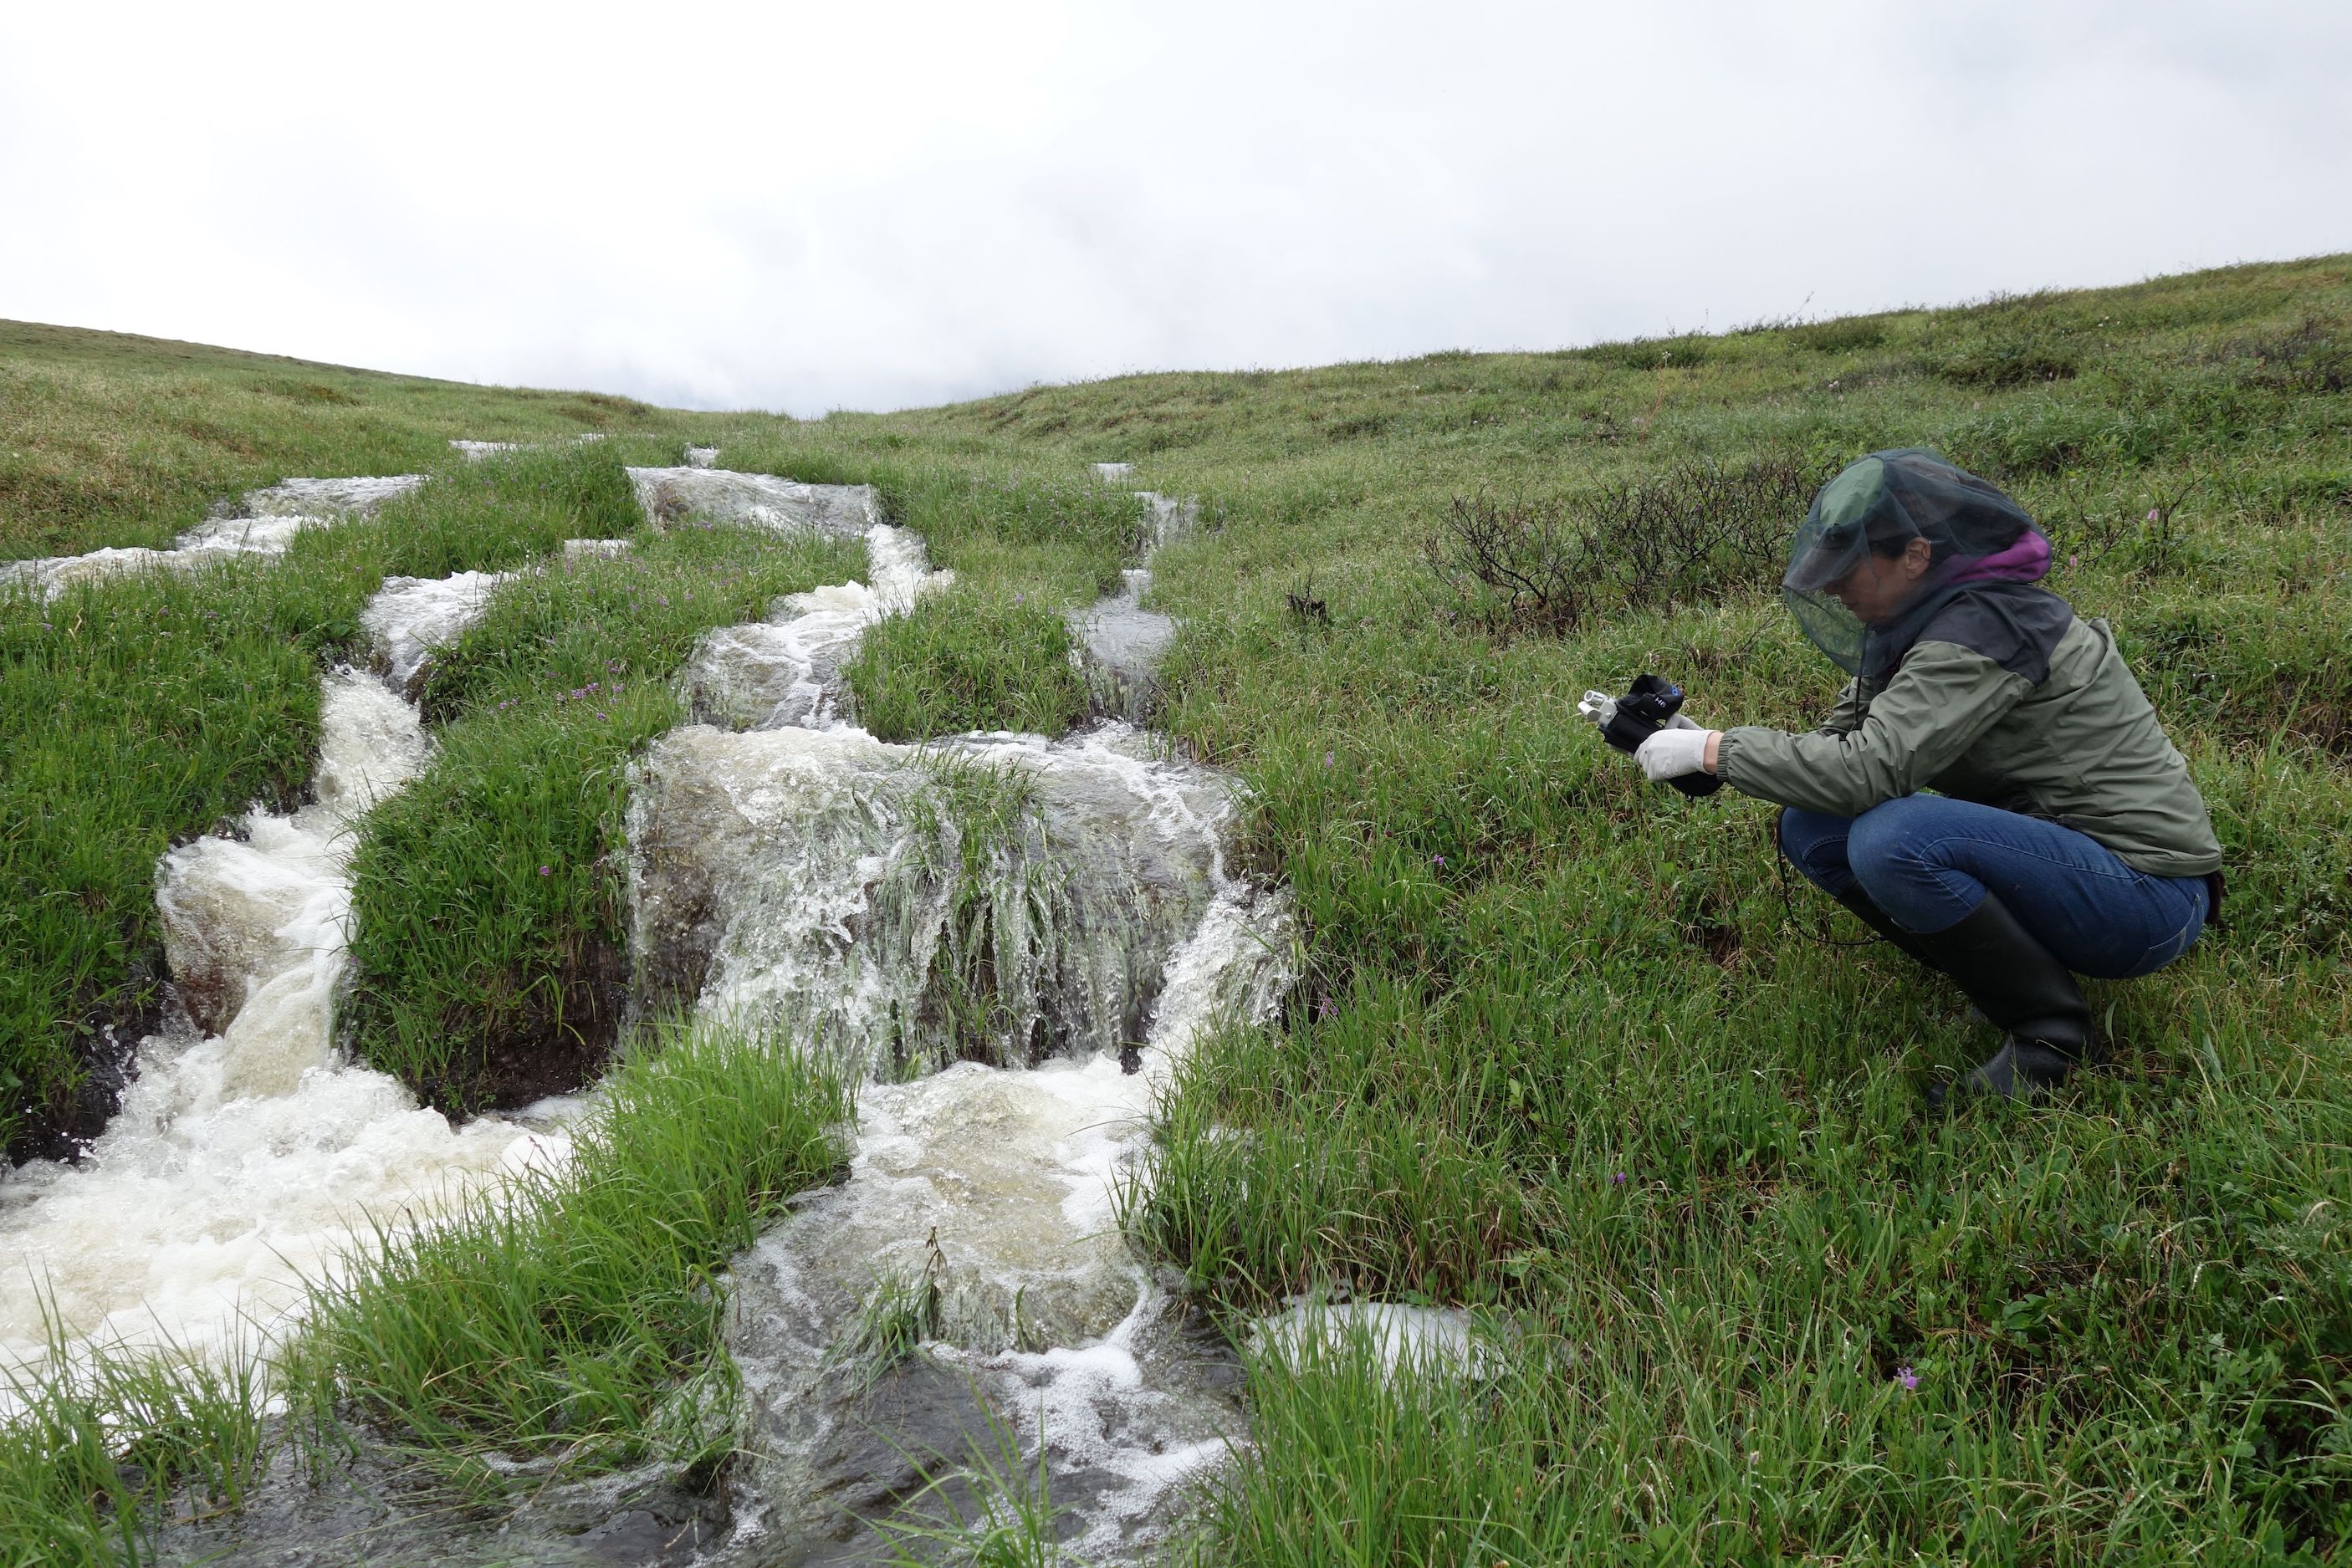 Nikki Lindt stoops by an Arctic stream to capture audio recordings of the tundra.